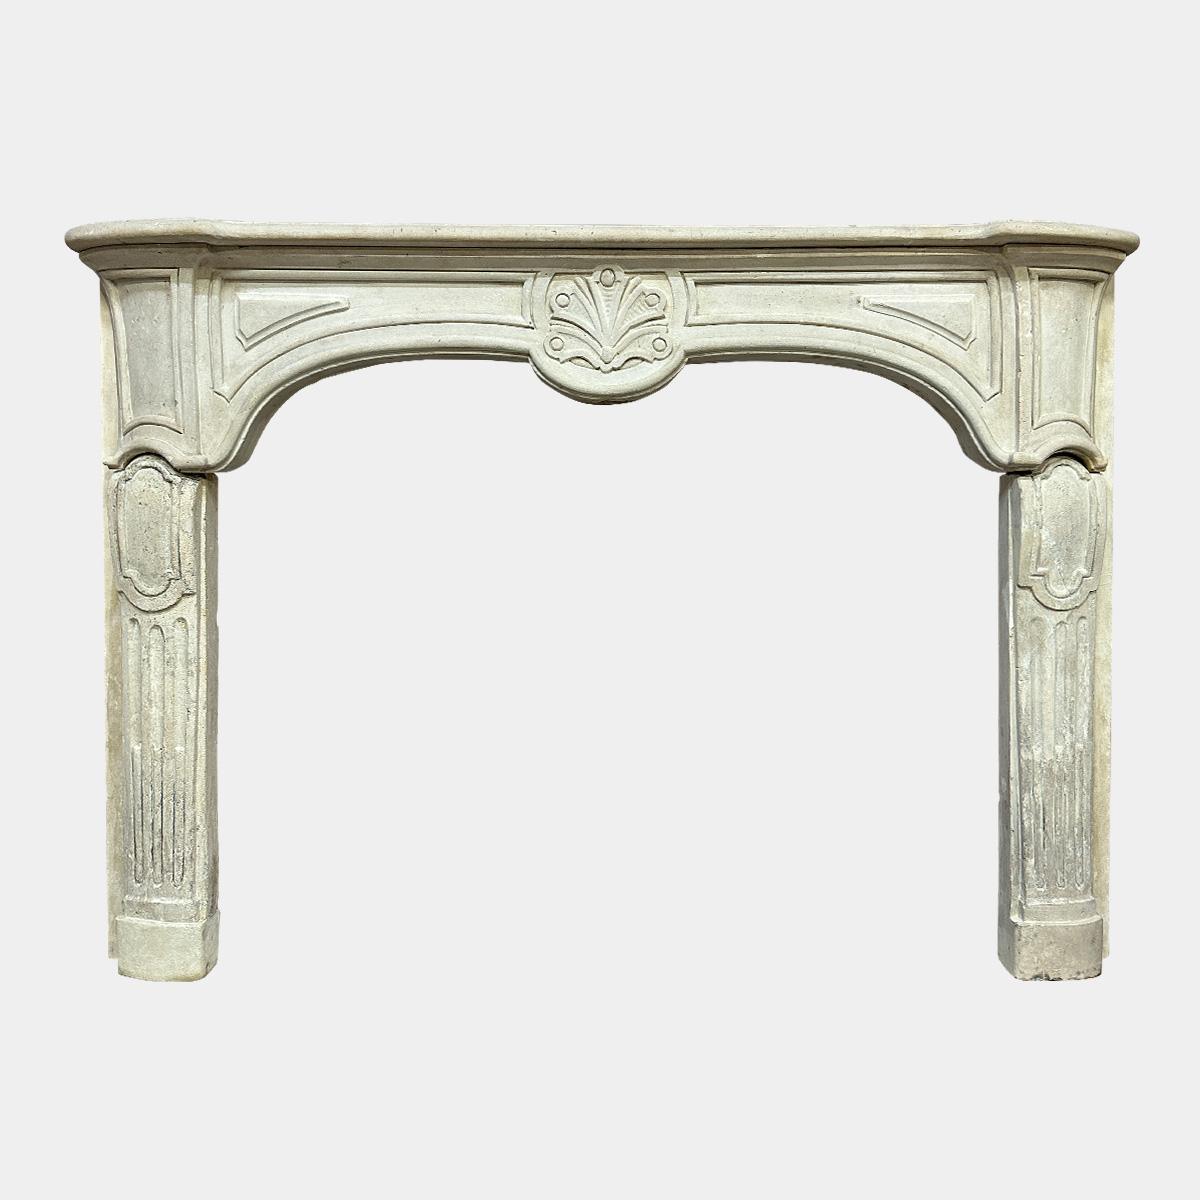 An Antique 18th century Provincial French Stone Fireplace Mantel  For Sale 2